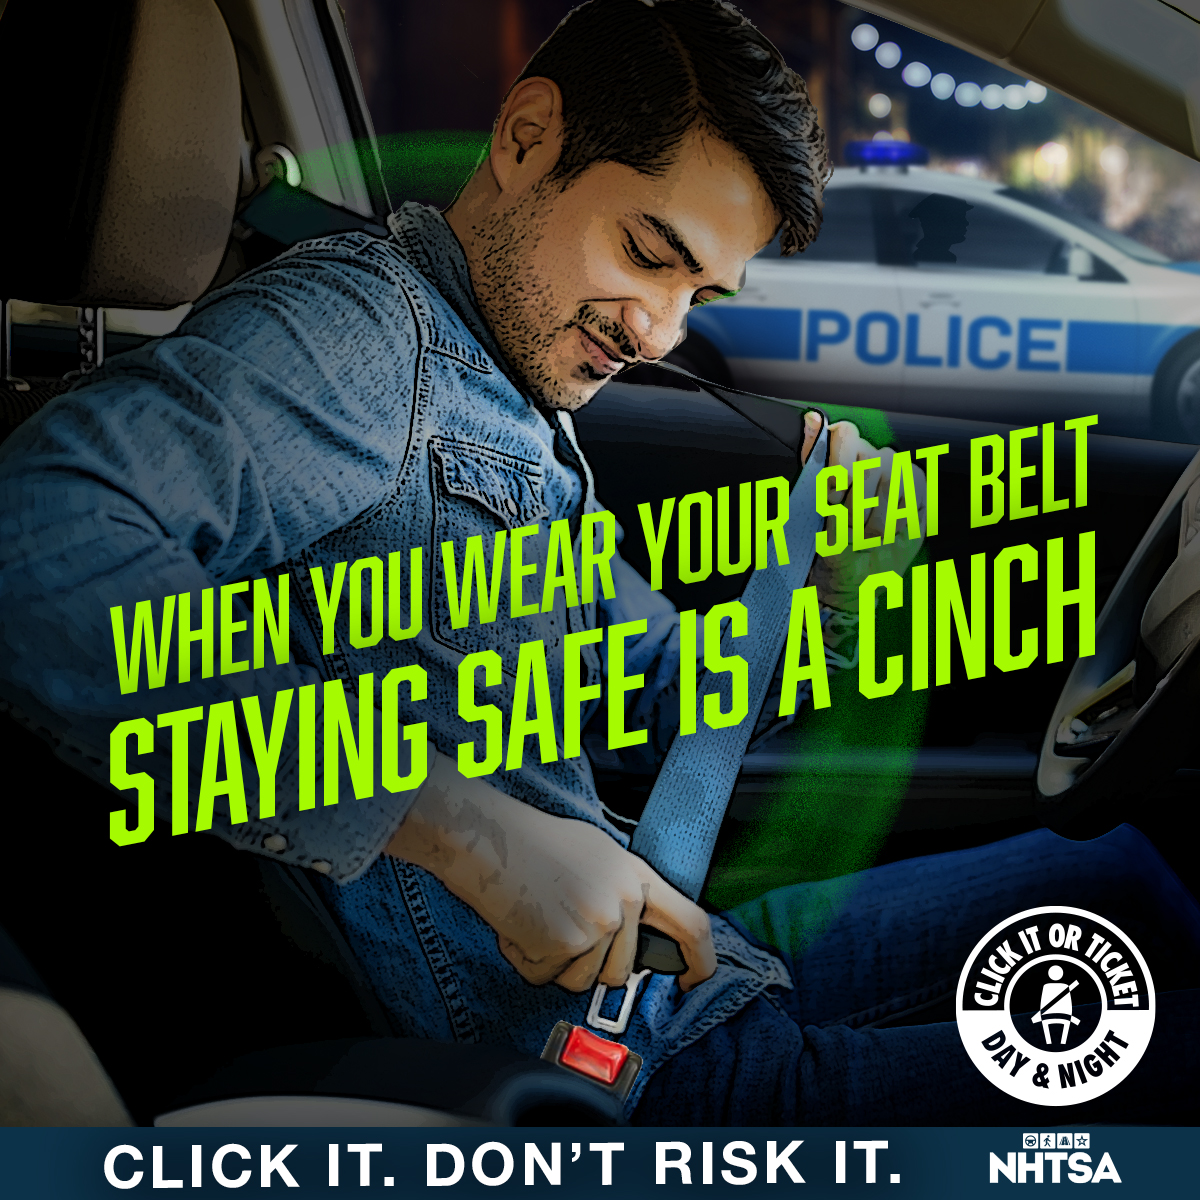 Close calls can happen close to home. Wear your seat belt every time you get into your vehicle. #ClickItOrTicket #ClickItDontRiskIt